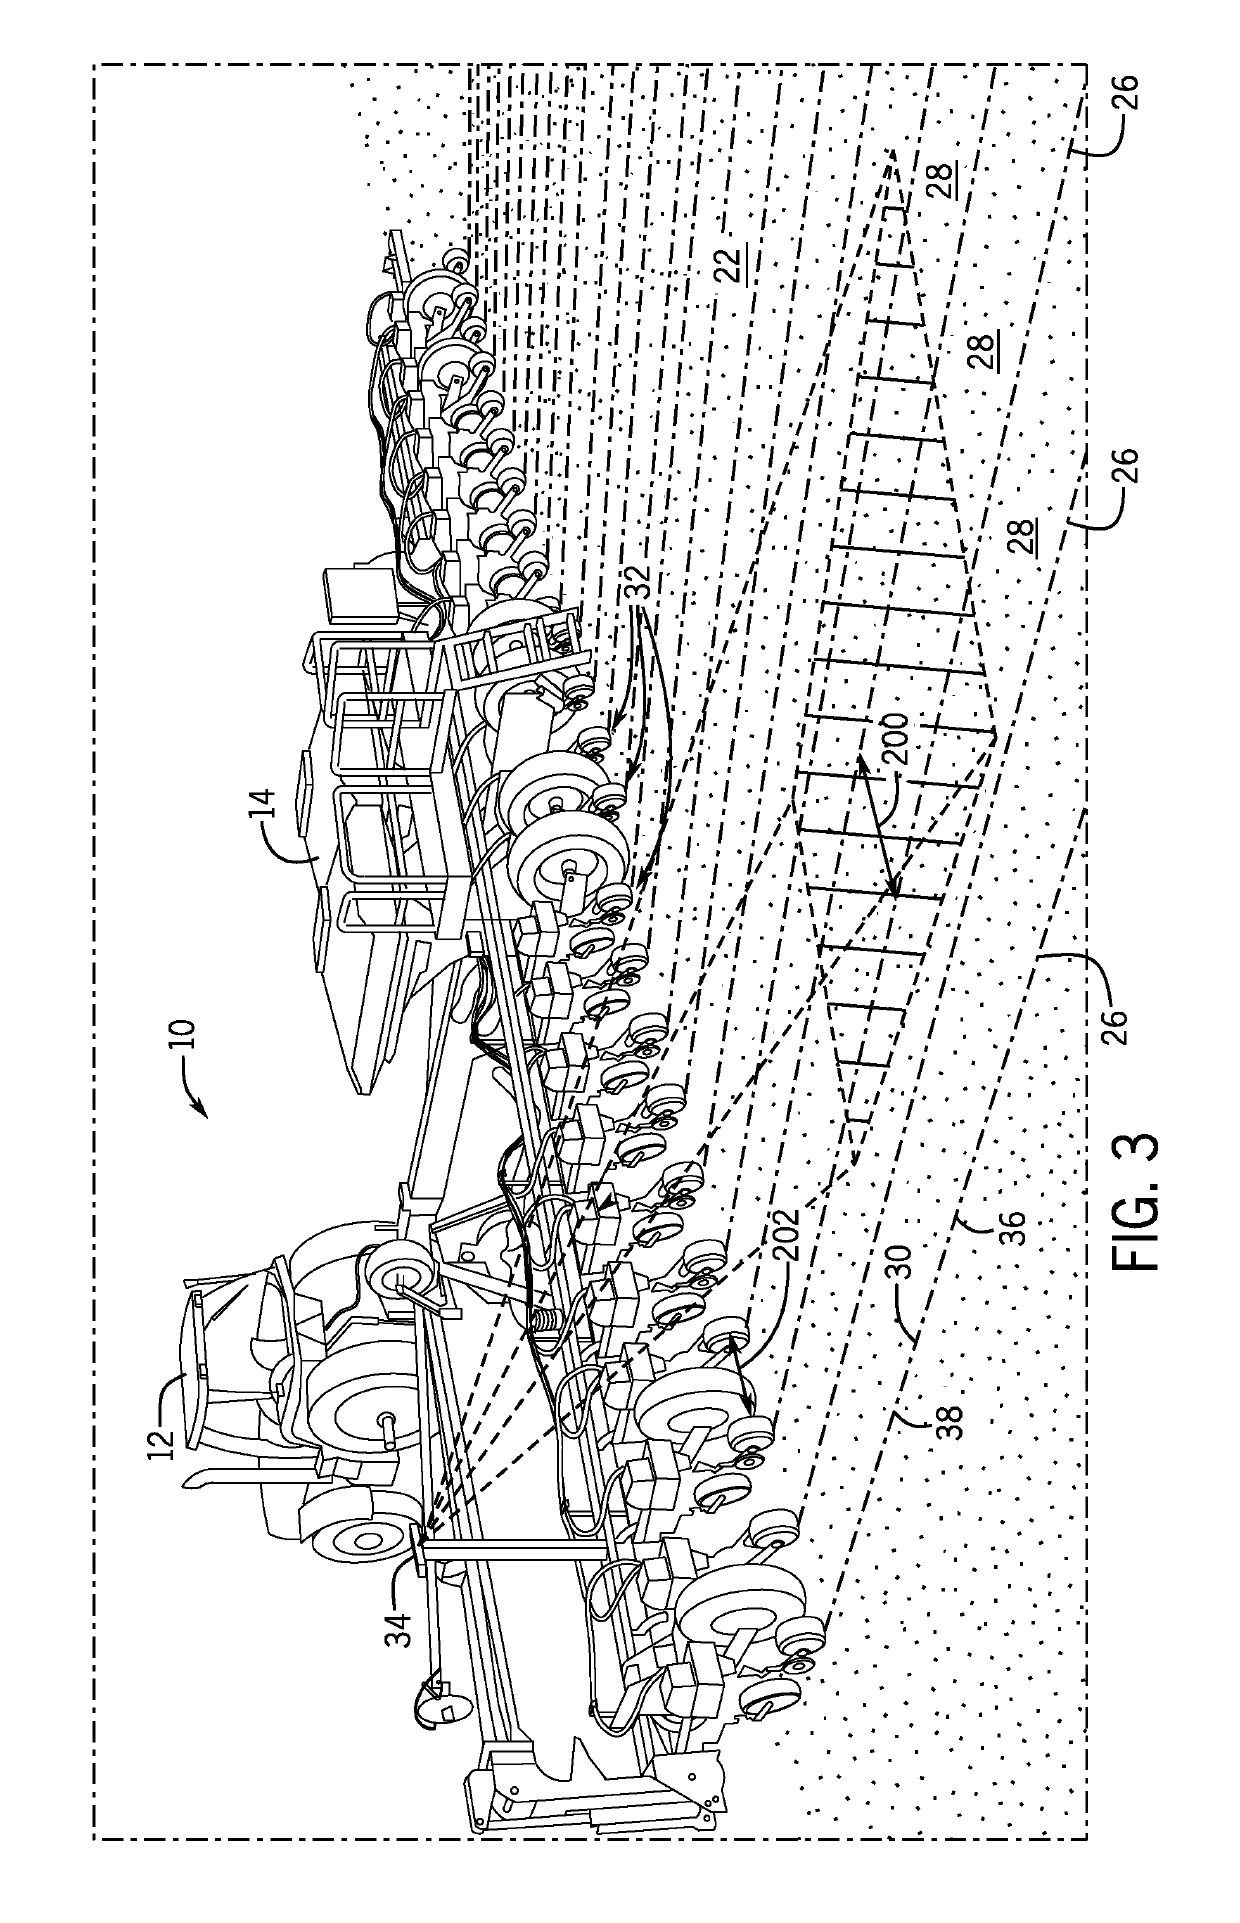 System and method for strip till implement guidance monitoring and adjustment